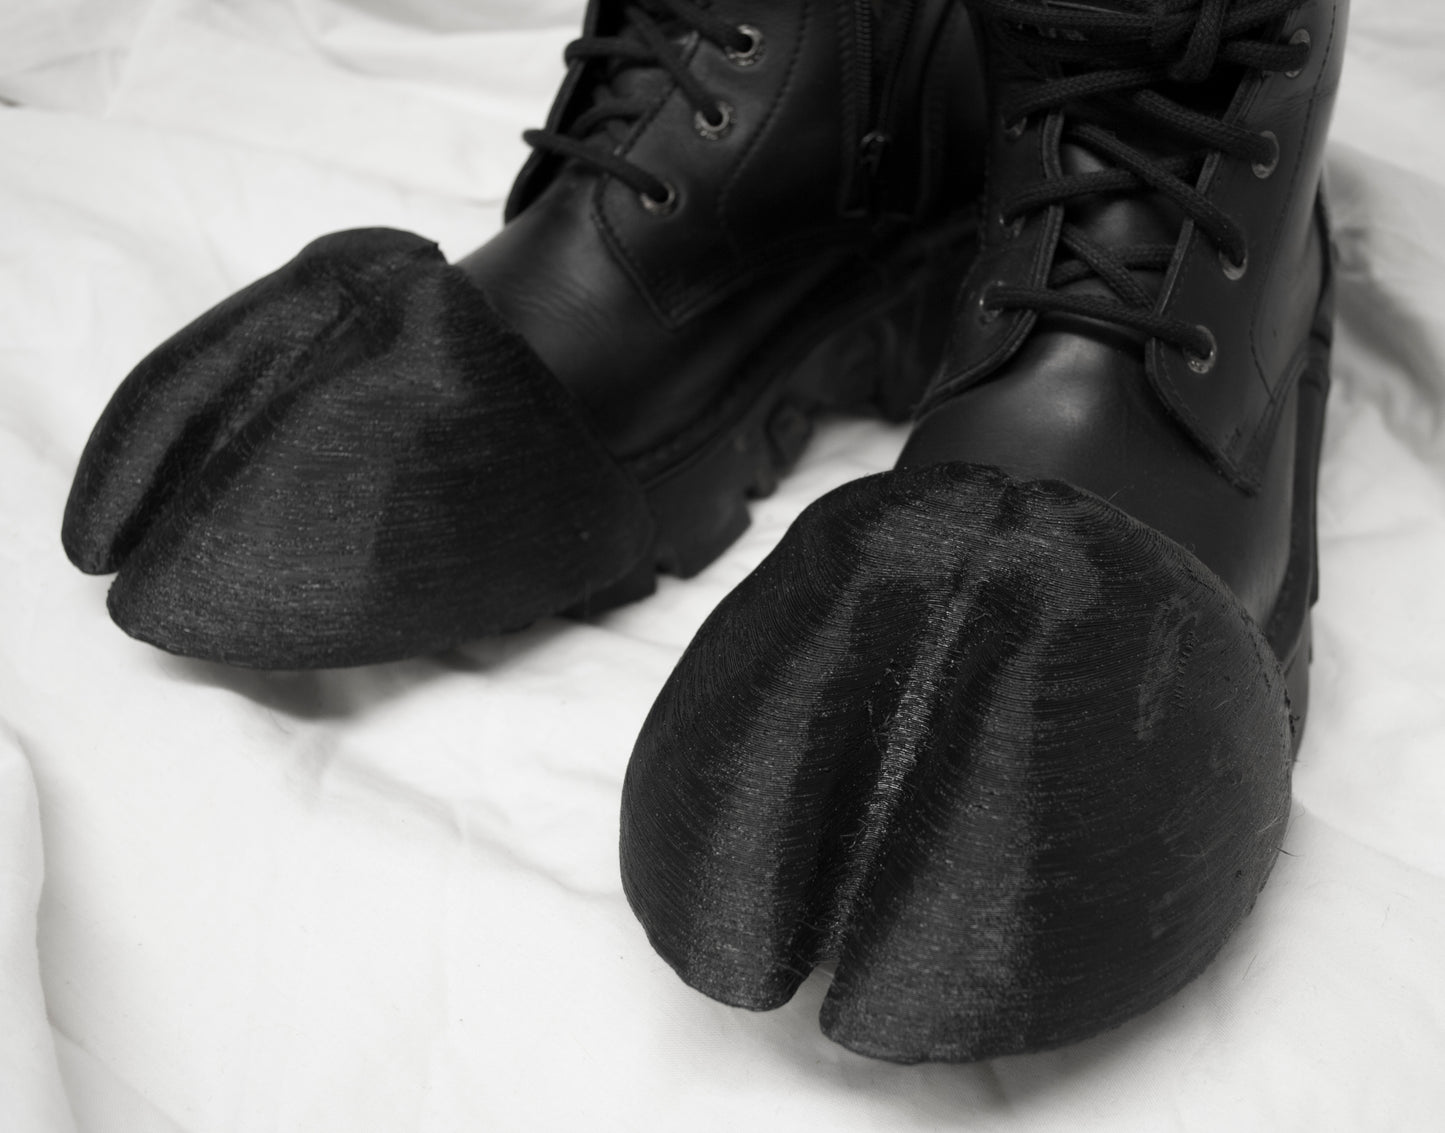 Subtle hooves, for LARP, Cosplay, fursuits and more (1 pair)